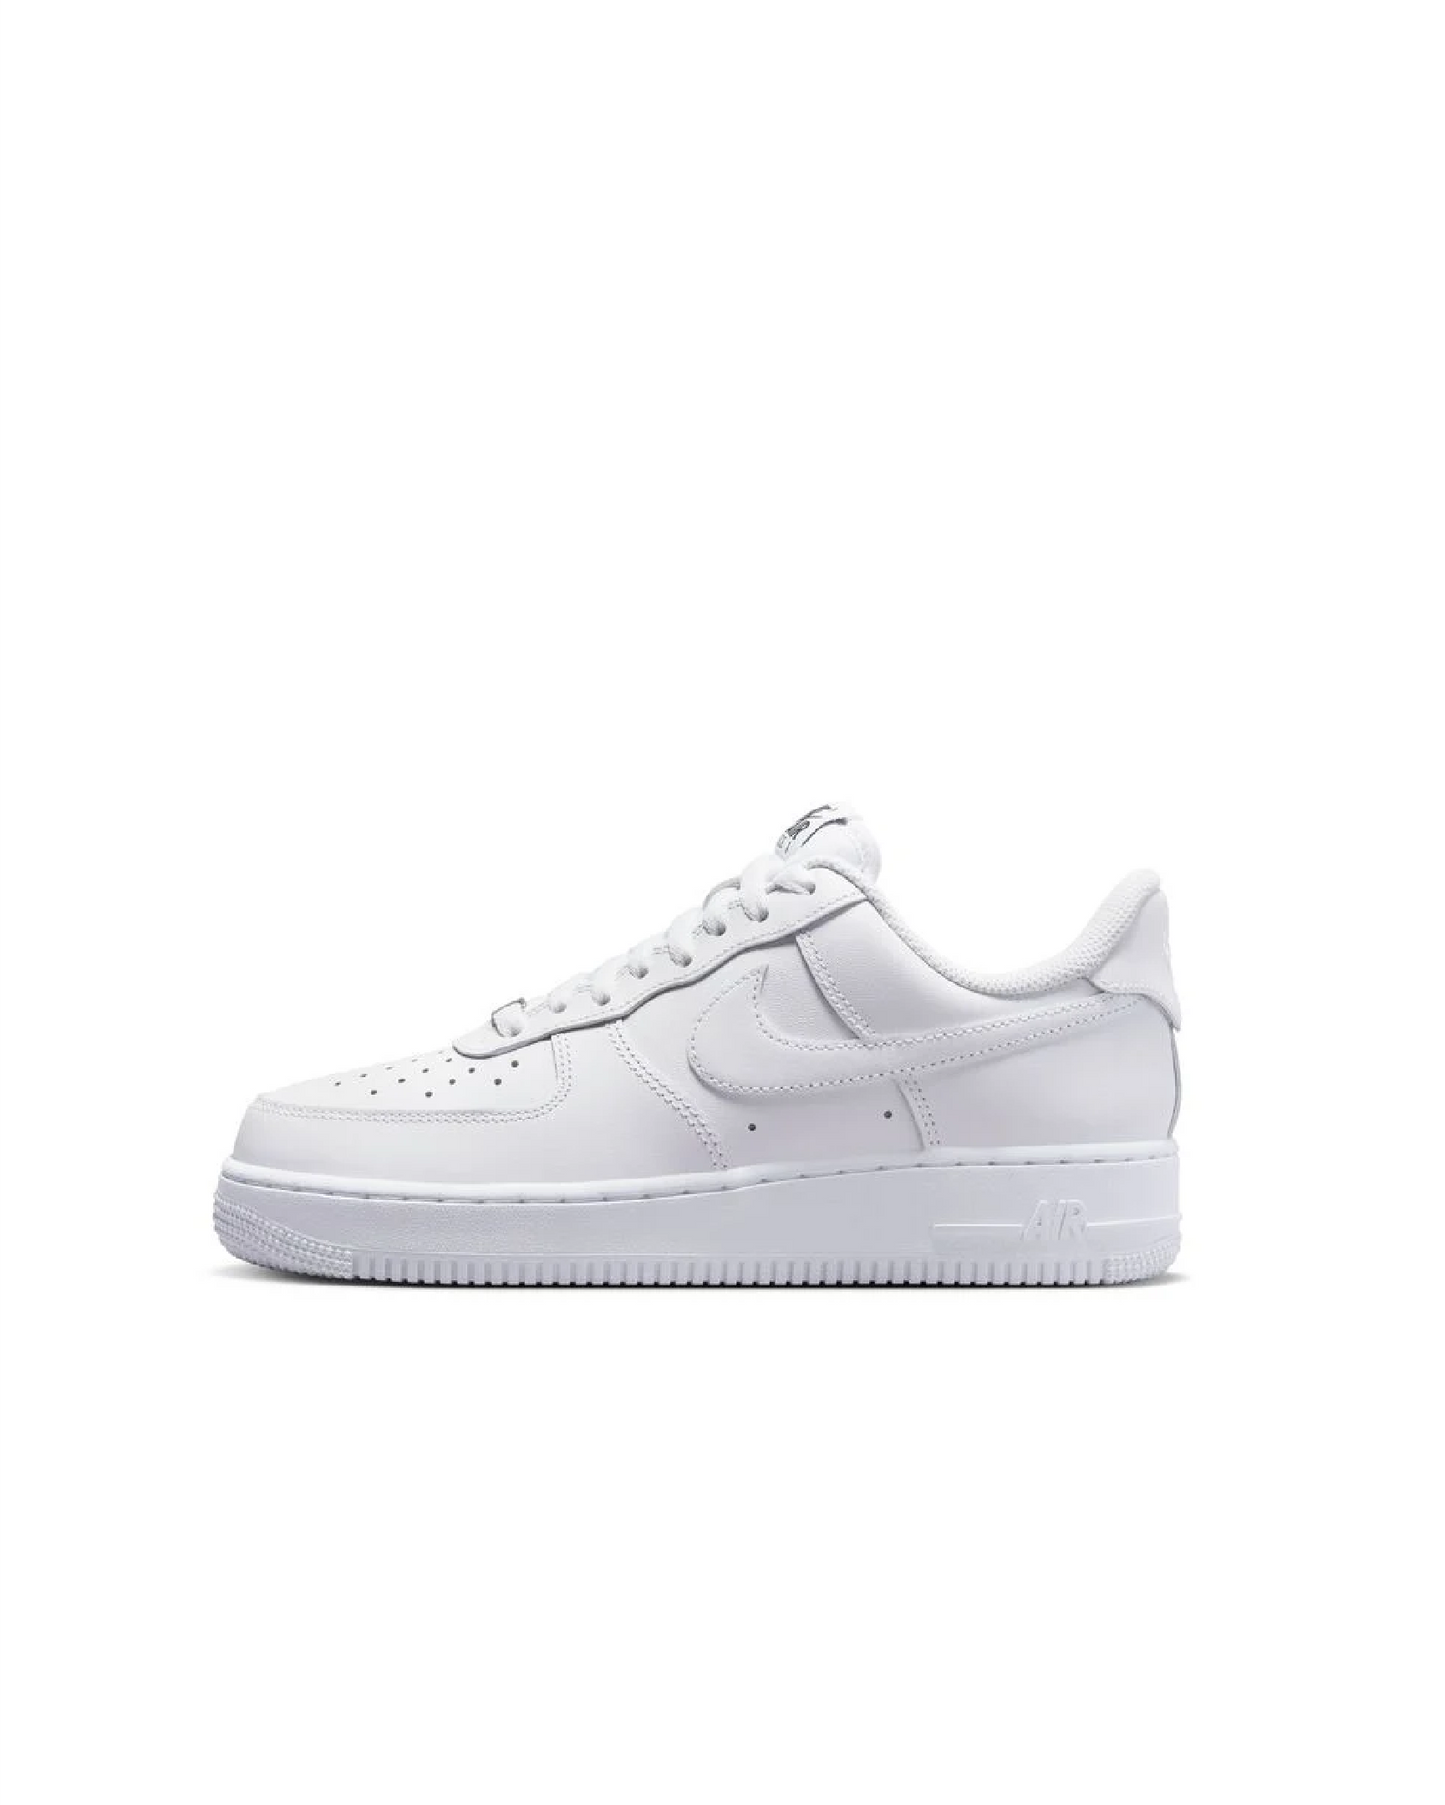 NIKE W AIR FORCE 1 '07 FLYEASE - WHITE